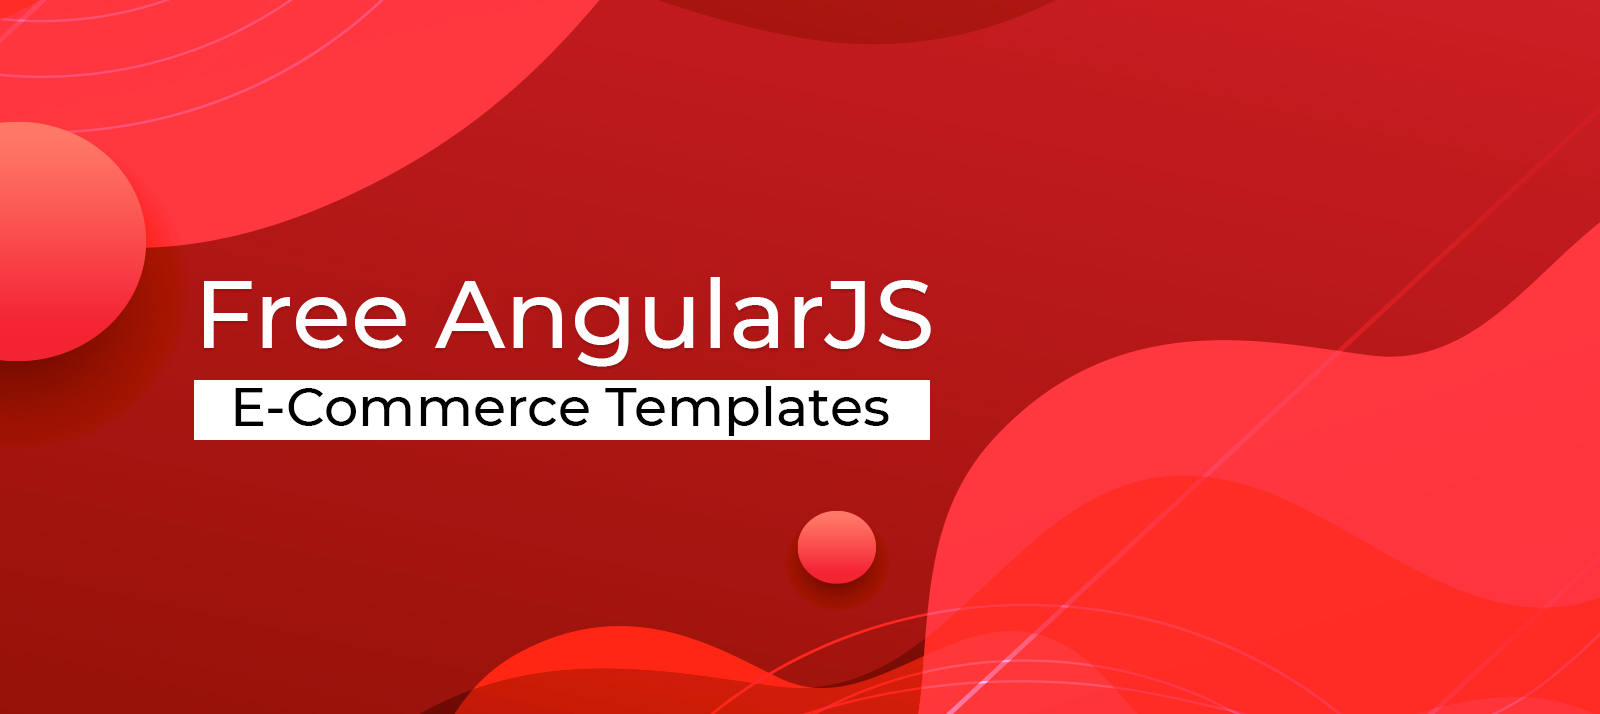  Free and Feature-Packed AngularJS Ecommerce Templates